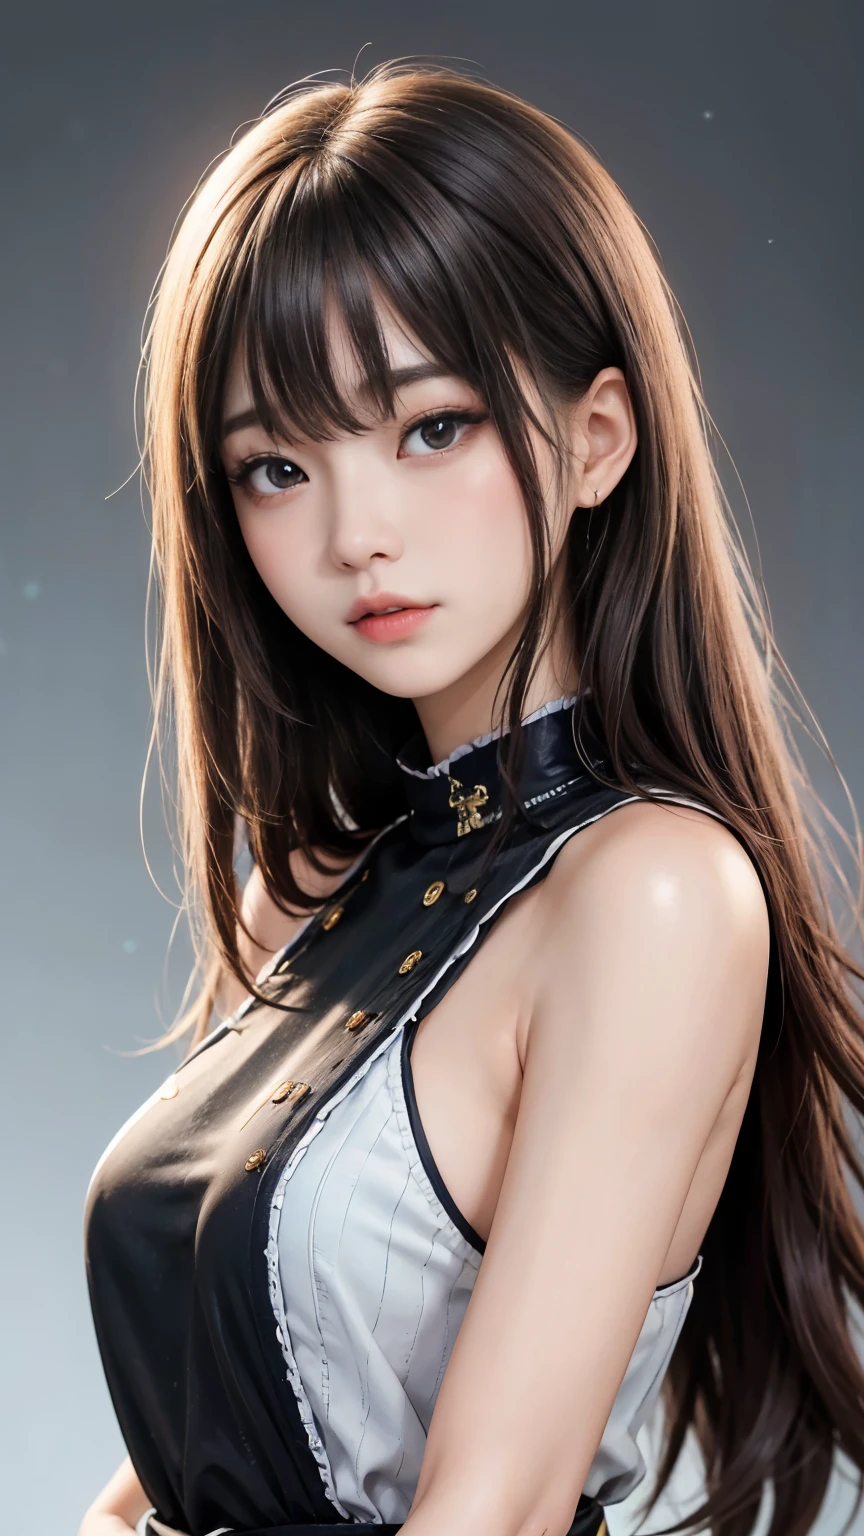 (highest qualityのディテール)、Realistic、8k Ultra HD、High resolution、(One Girl:1.2),(Fatal Beauty,Attractive beauty) ,(Mysterious charm:1.1),(Captivating silhouette),The Super detailed、High quality textures、Intricate details、detailed、Very detailed CG、High quality shadows、detailed Beautiful and delicate face、detailed Beautiful and delicate eyes、Written boundary depth、Ray Tracing、20th generation、Cute K-Pop Girls、(The Face of Ulzan in Korea)、Thin face、(URZAN-6500-v1.1:0.6)、PurerosFace_v1、Glowing Eyes、Perfect body、 Viewer Display、(highest qualityのディテール:1.2)、Realistic、8k Ultra HD、High resolution、Close-up of a woman， realistic girl rendering, 8k artistic german bokeh, Enchanting girl, Real Girls, Gurwitz, Gurwitz-style artwork, Girl Roleplay, Realistic 3D style, cgstation Popular Topics,, 8K Portrait Rendering,（truth，truth：1.4），(Sparkling eyes girl:1.2)、The Super detailed、High quality textures、Intricate details、detailed、Very detailed CG、High quality shadows、detailed Beautiful and delicate face、detailed Beautiful and delicate eyes、Written boundary depth、Ray Tracing、20th generation、Cute K-Pop Girls、(The Face of Ulzan in Korea)、Thin face、(URZAN-6500-v1.1:0.6)、cheek、Glossy Lips、、High resolution, Best image quality, highest quality, Realistic, Super detailed, Photo realistic, 4K 8k Ultra HD Full Color RAW Photos, Fujifilm(Medium format), hasselblad, Carl Zeiss, Incredible dynamic range photography(utility_art：Smooth-768:1.1),High resolution, High pixel count, Clear detailed, Clear images, Natural color reproduction, Noise Reduction, High fidelity, quality, Software Improvements, Upscaling, Optimized Algorithms, Professional-level retouching,

1. Oversized coat:

The coat is、Choose an oversized design that covers from shoulders to knees.。Color is classic navy or black、or warm khaki or beige, hang on.、Choose colors that match the season。
2. Knitted sweater or turtleneck:

To protect yourself from the cold、Choose a knitted sweater or turtleneck。Match the texture and color of the knit to the coat.。
3. Wide leg pants:

For pants, Choose a wide-leg design、Combines ease of movement and style。Denim in dark tones or black trousers will look good.。
4. Knee-high boots:

What is included in an oversized coat、Pair with knee-high boots that cover your ankles and calves。Boots are black or dark brown and chic.、Gives a stylish impression。
5. accessories:

Choose simple gold or silver accessories、Add elegance to your outfit。for example、Long necklaces are recommended, Big earrings and glasses..。
6. Handbags:

Handbags、Choose a color that matches the tone of your outfit.。Shoulder bags and tote bags are convenient and stylish。
7. Compensation and hairstyle:

Compensate, Choose natural colors that flatter your skin。Wavy Hair、By creating loose curls、Appeal to softness。